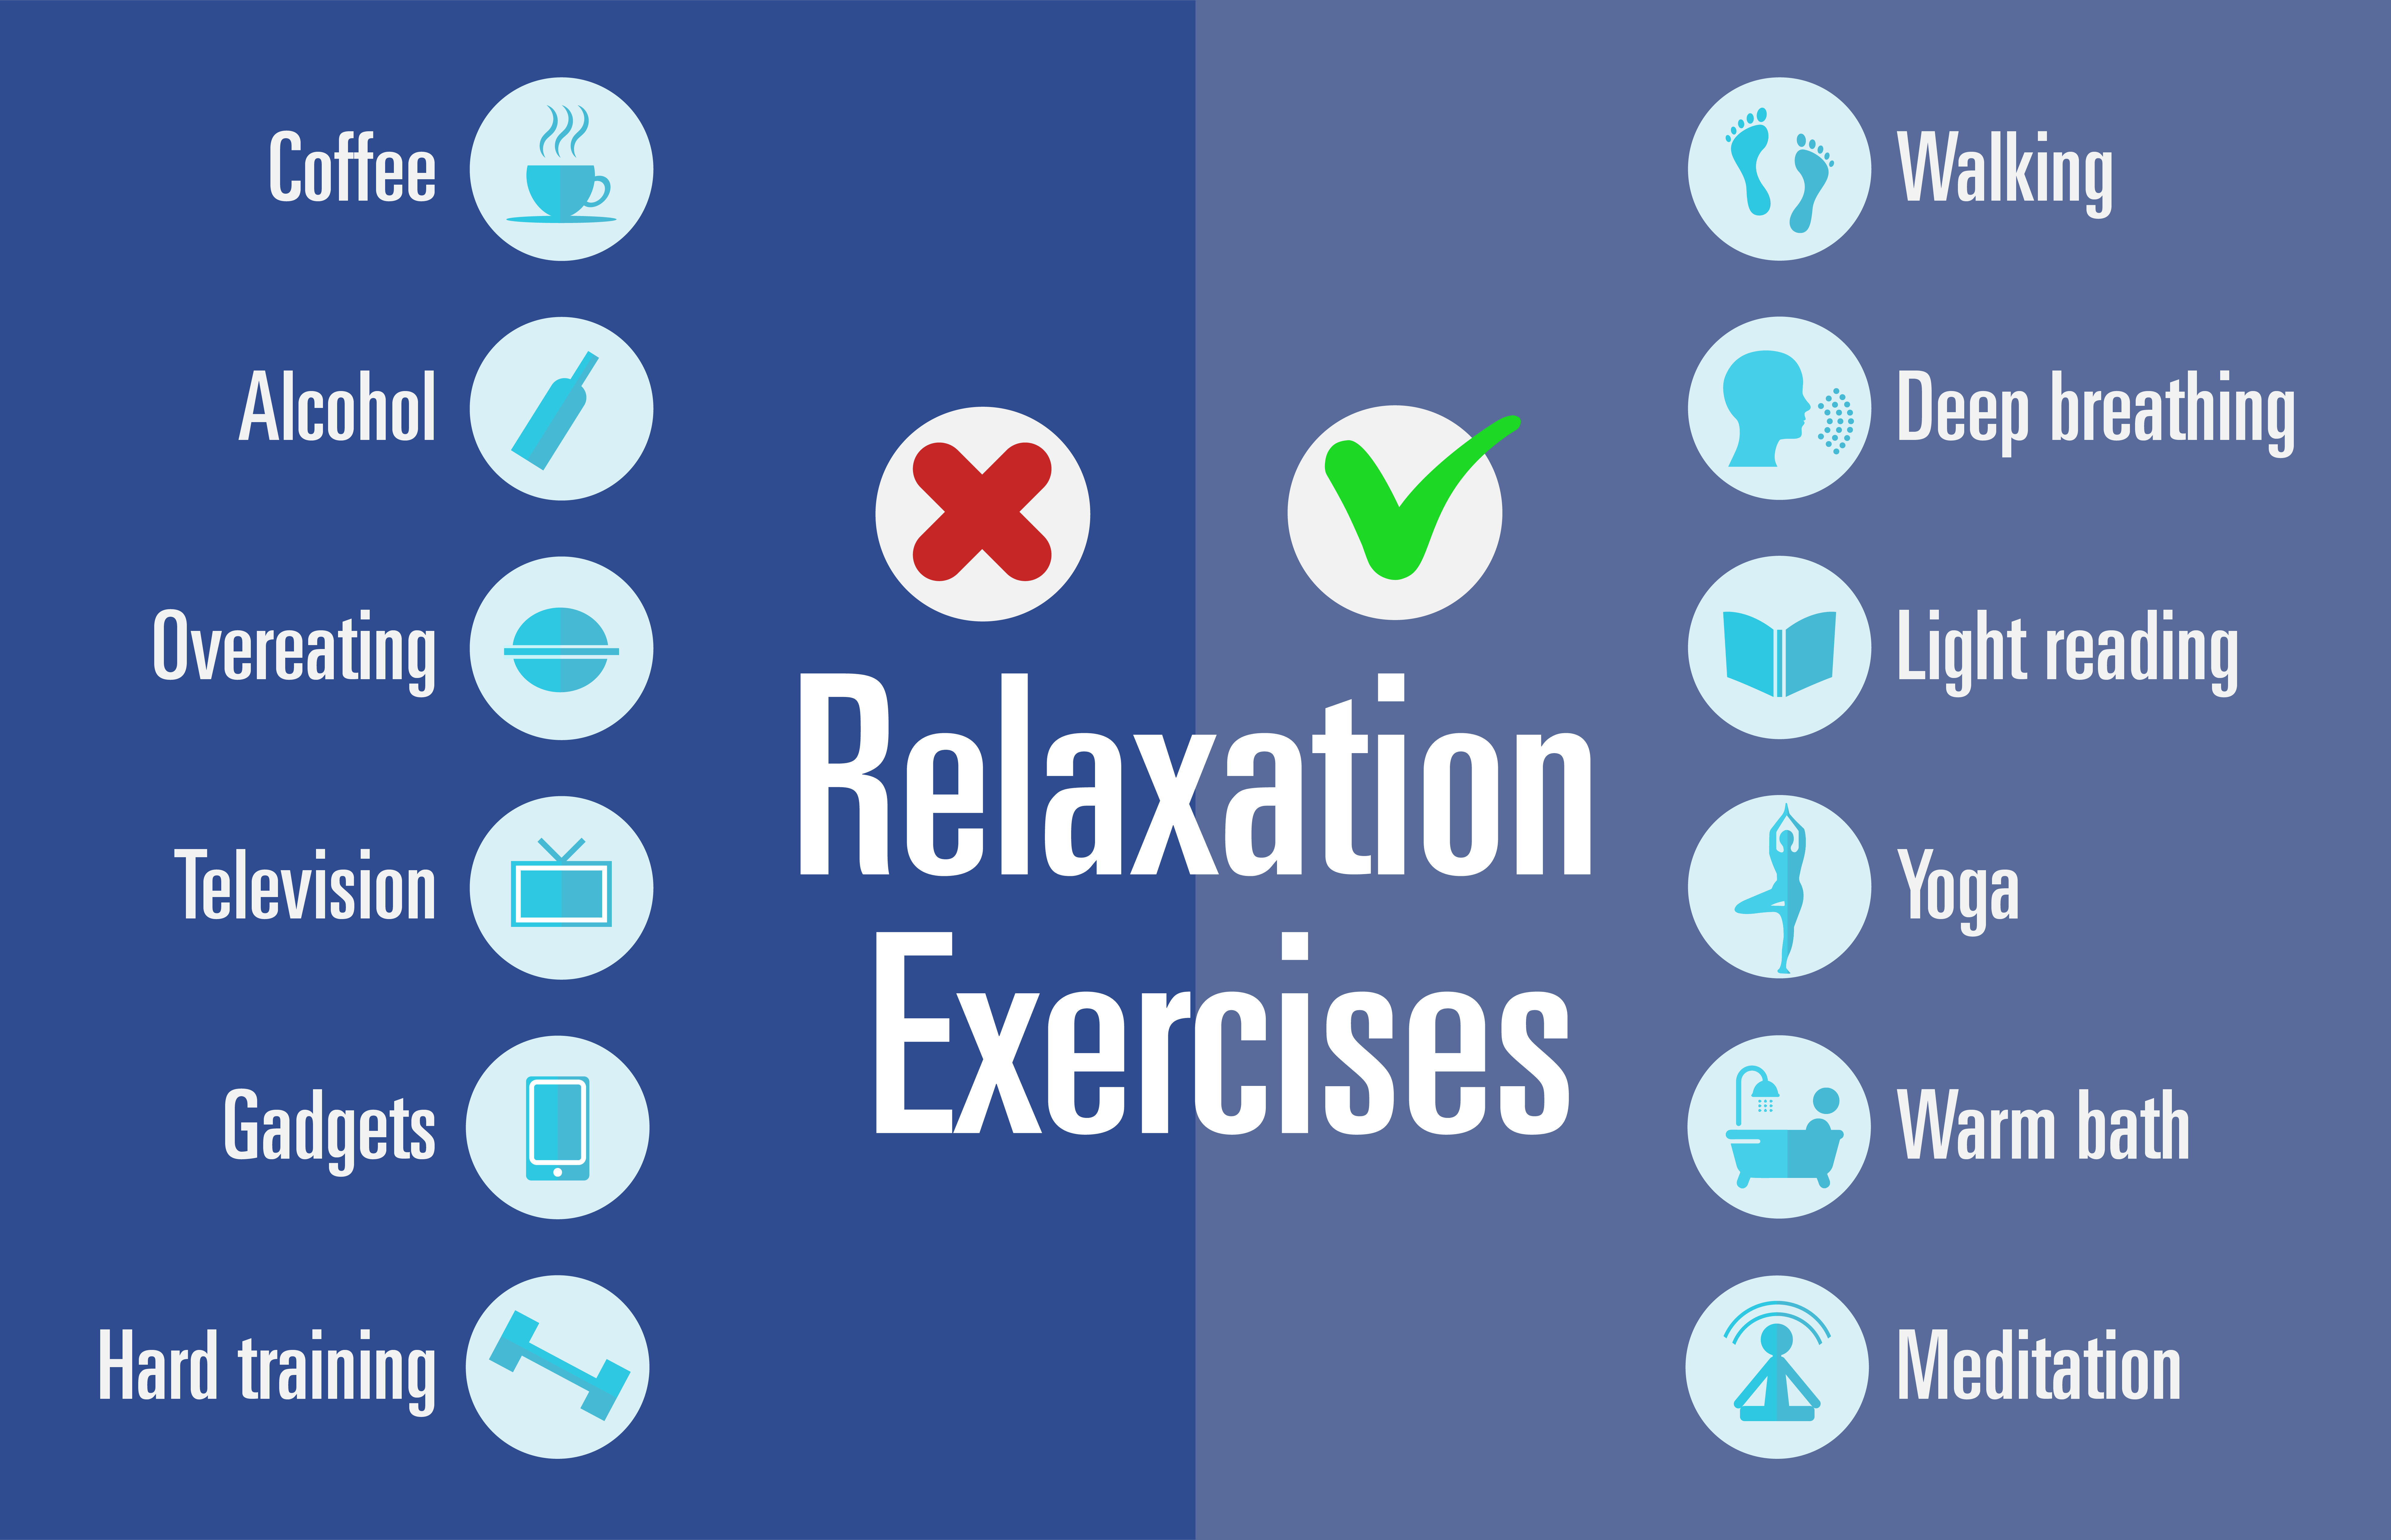 How to relax: Techniques, benefits, and when to seek help